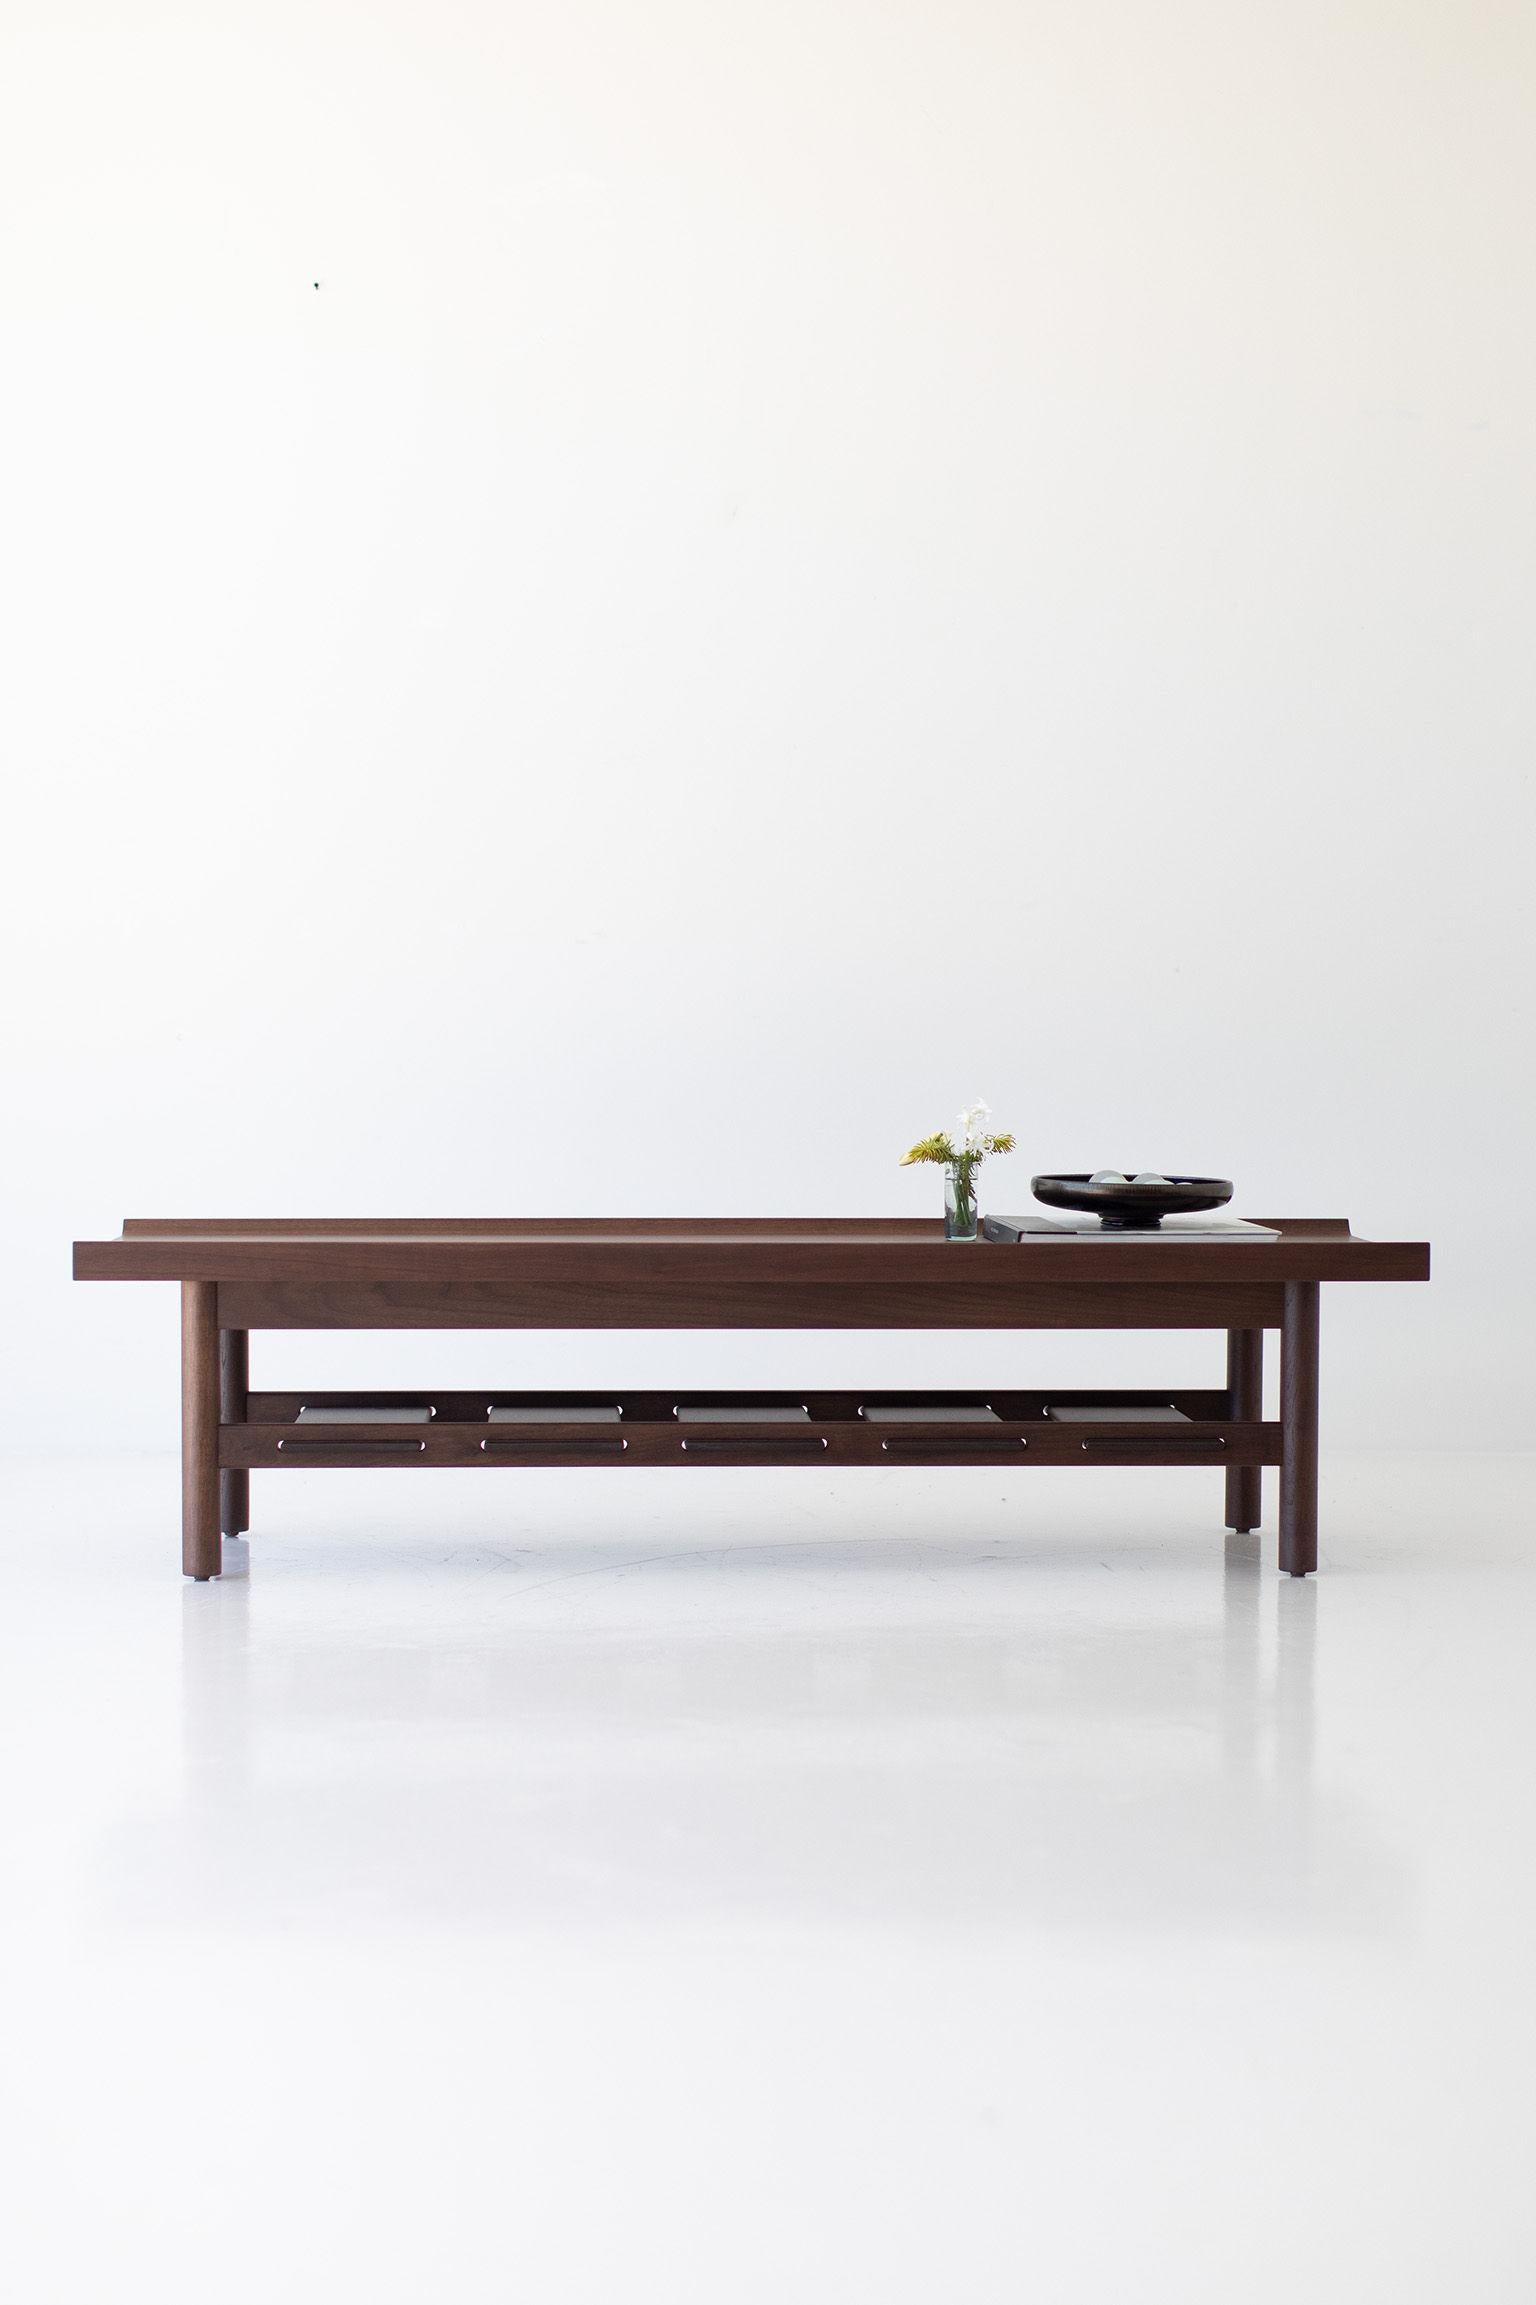 Lawrence Peabody modern coffee table for Craft Associates Furniture

This Lawrence Peabody modern coffee table for Craft Associates Furniture is expertly crafted. The coffee table is constructed by artisans from Walnut. This table is available in